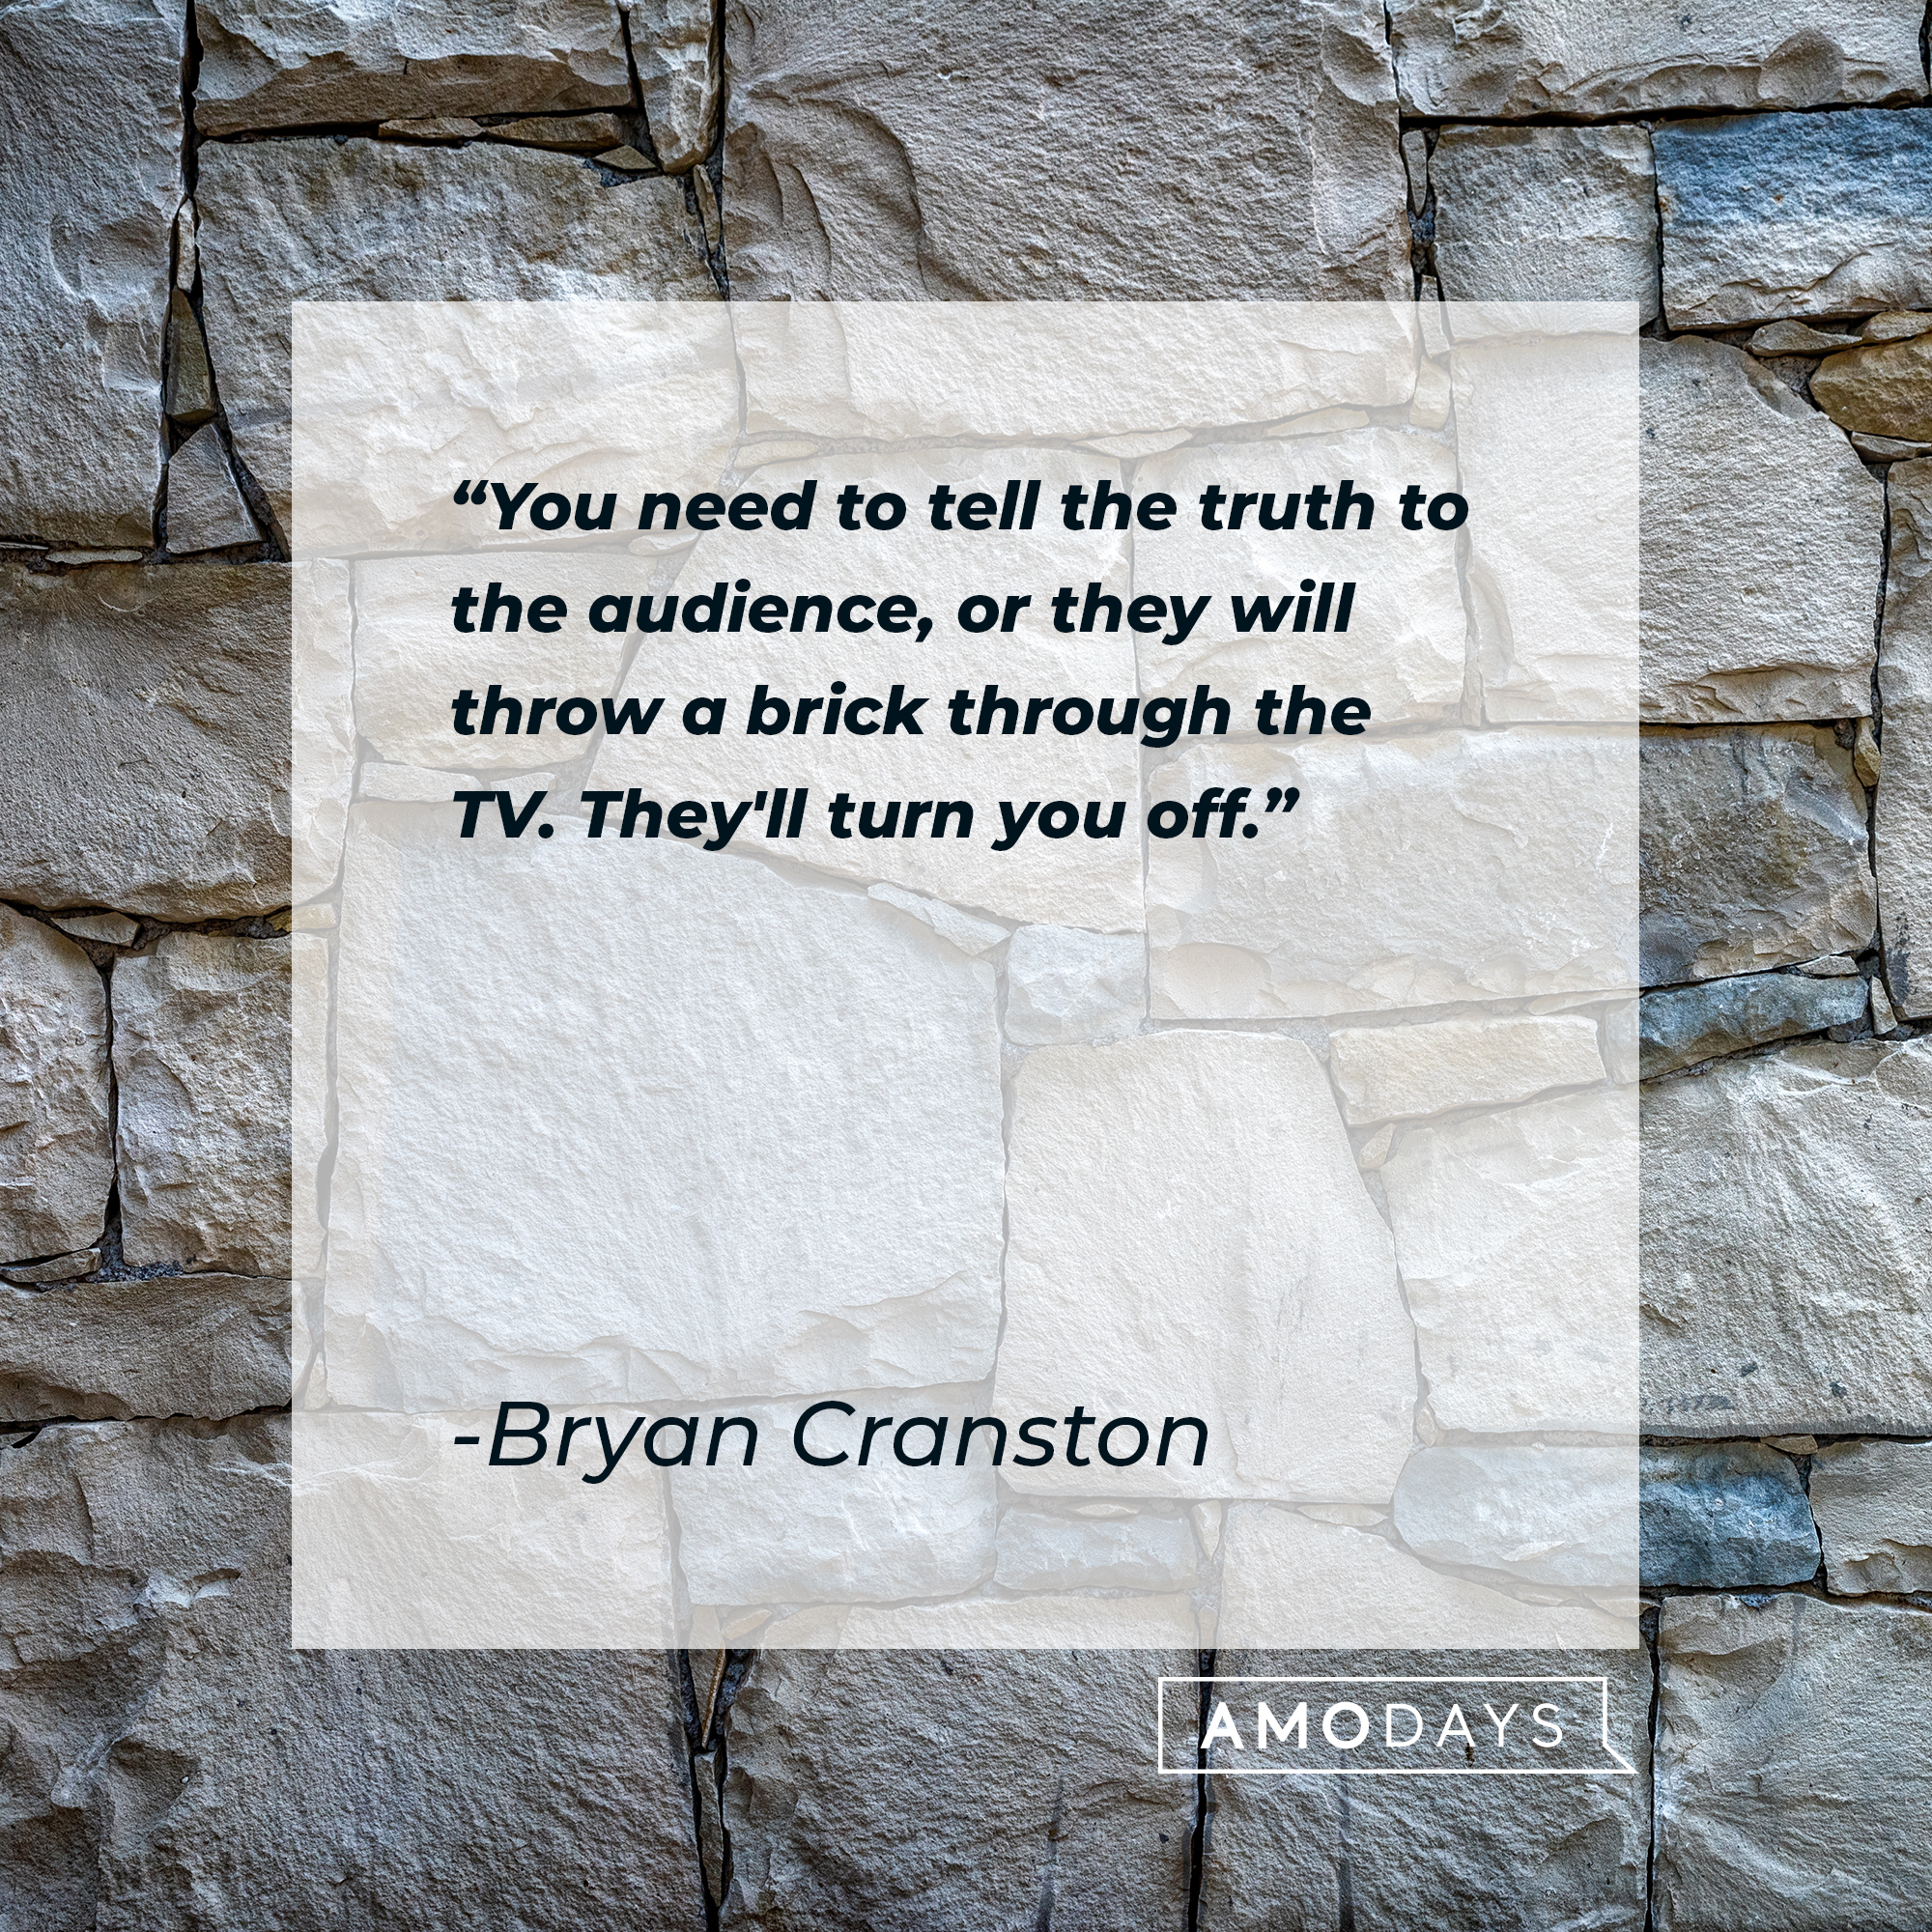 Bryan Cranston's quote: "You need to tell the truth to the audience, or they will throw a brick through the TV. They'll turn you off." | Source: Unsplash